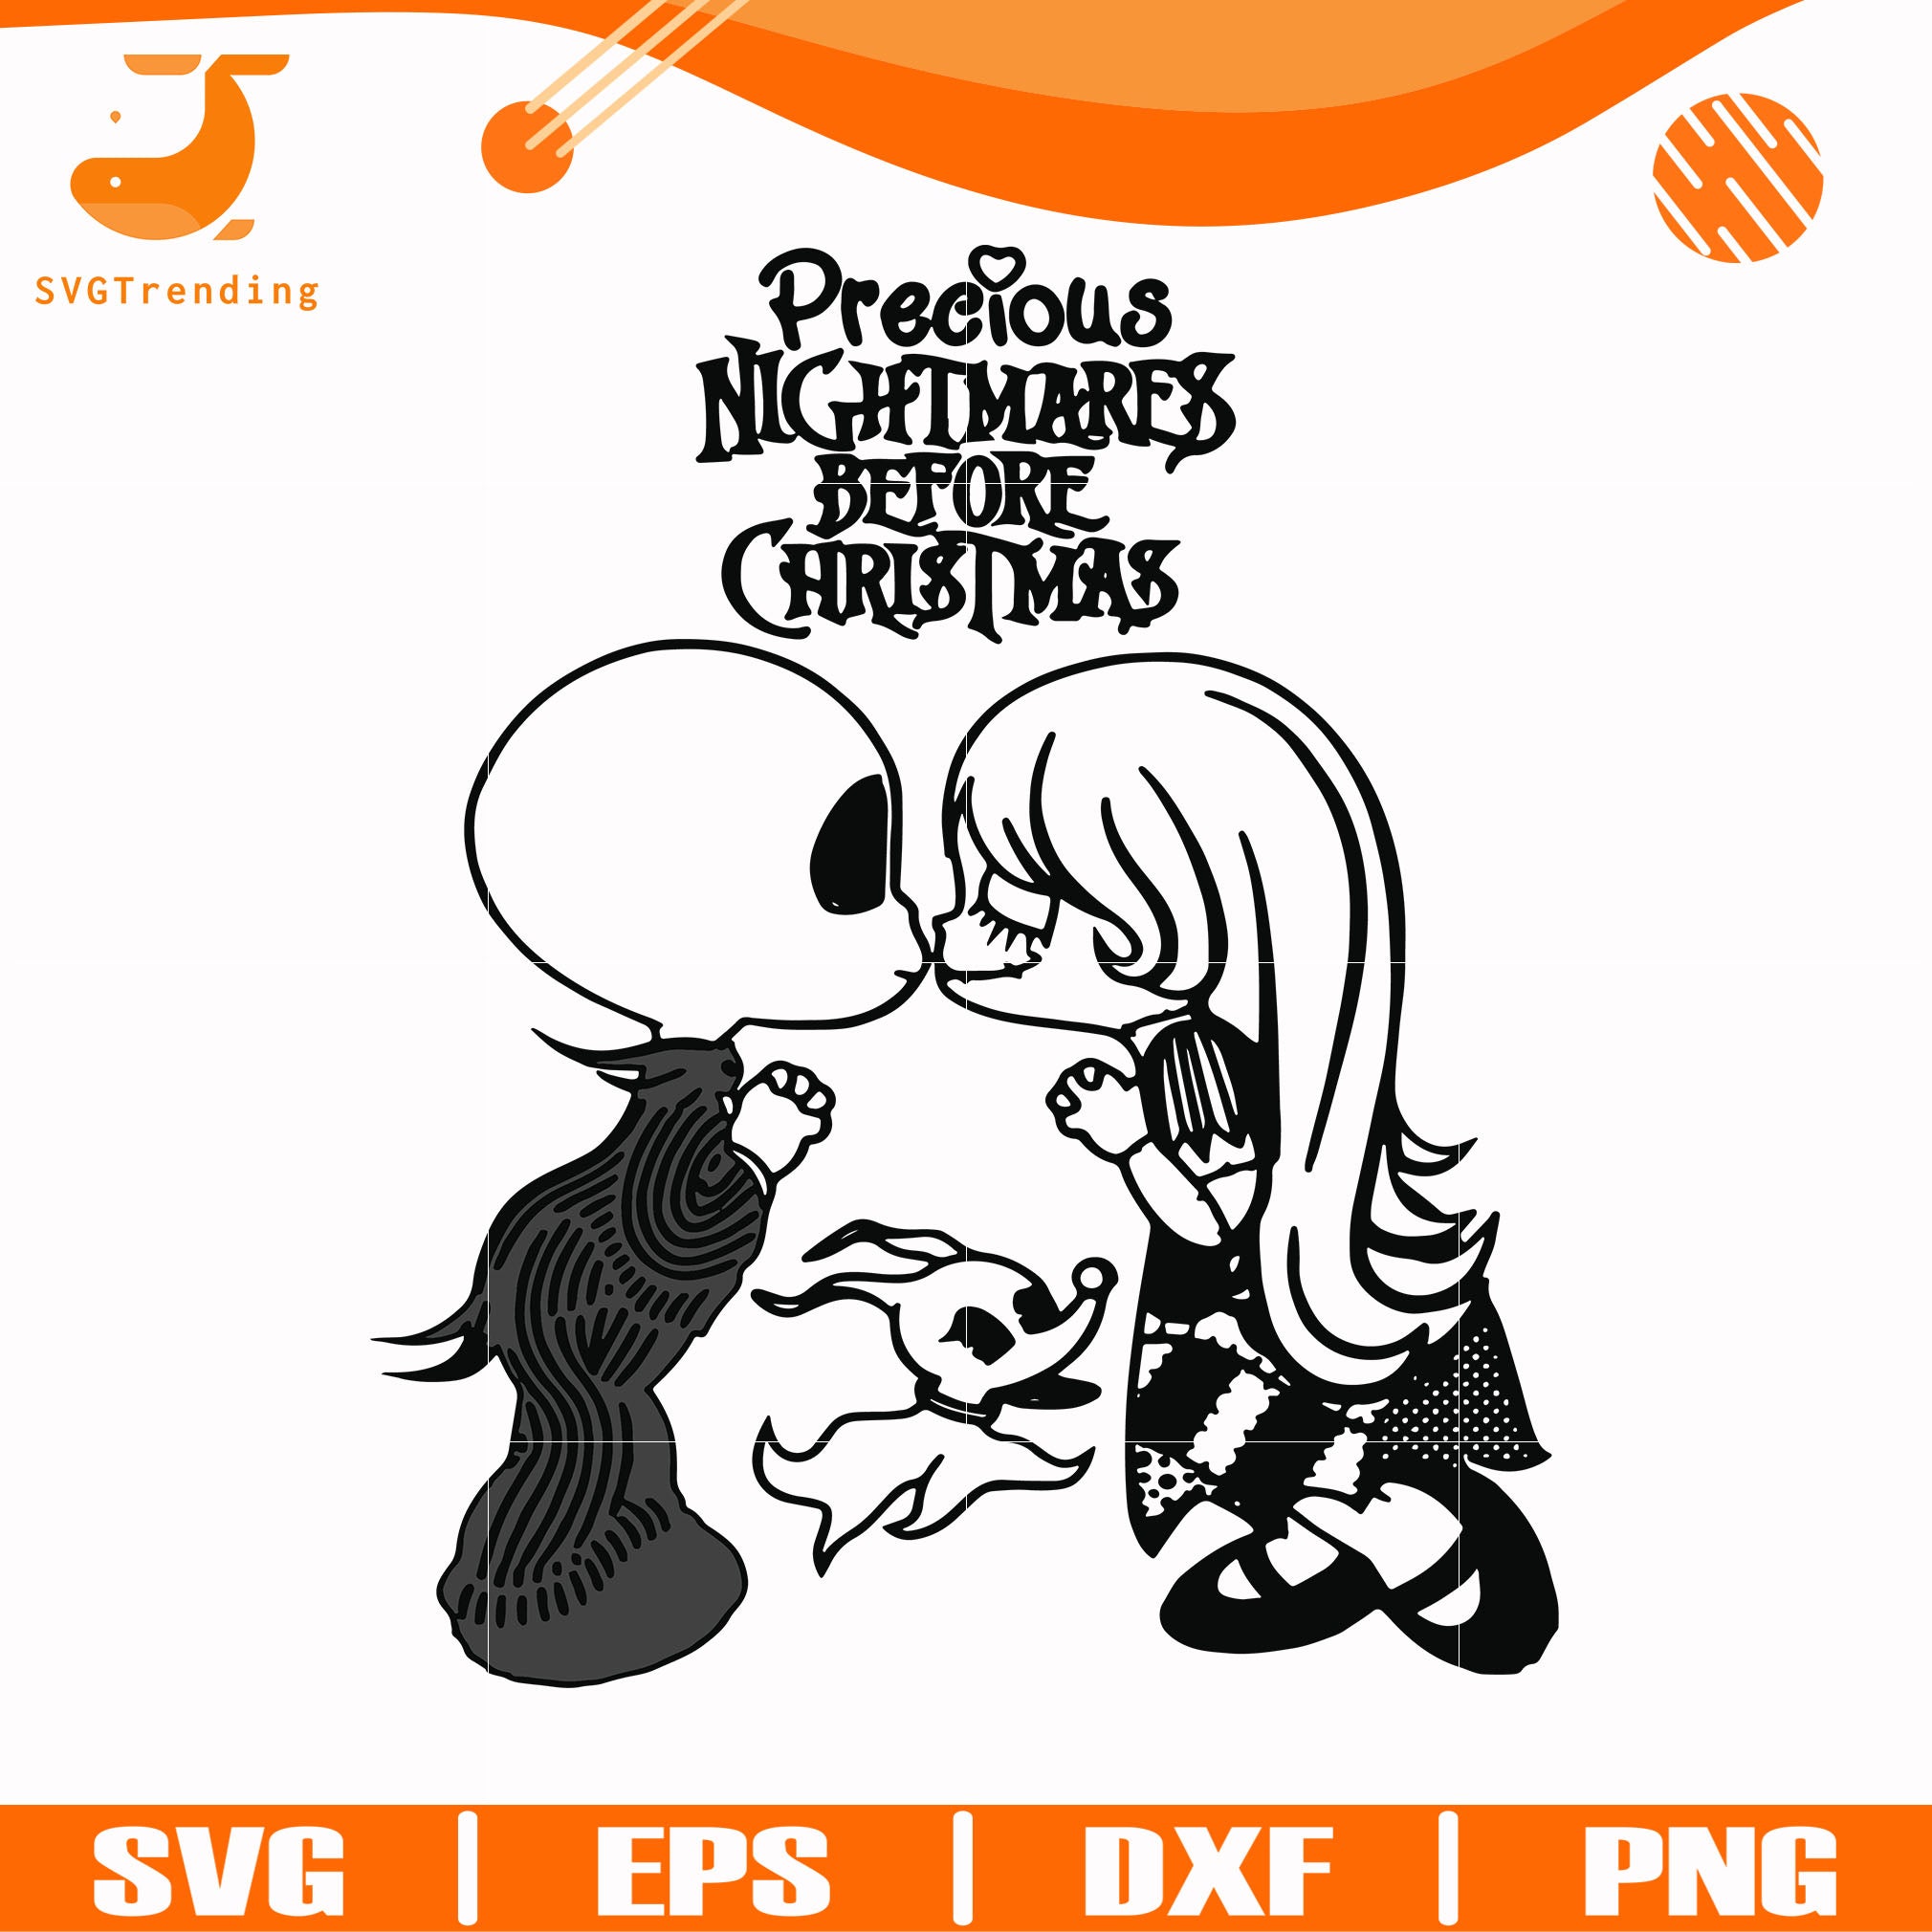 Download Precious nightmare before Christmas svg, png, dxf, eps digital file NC - SVGTrending